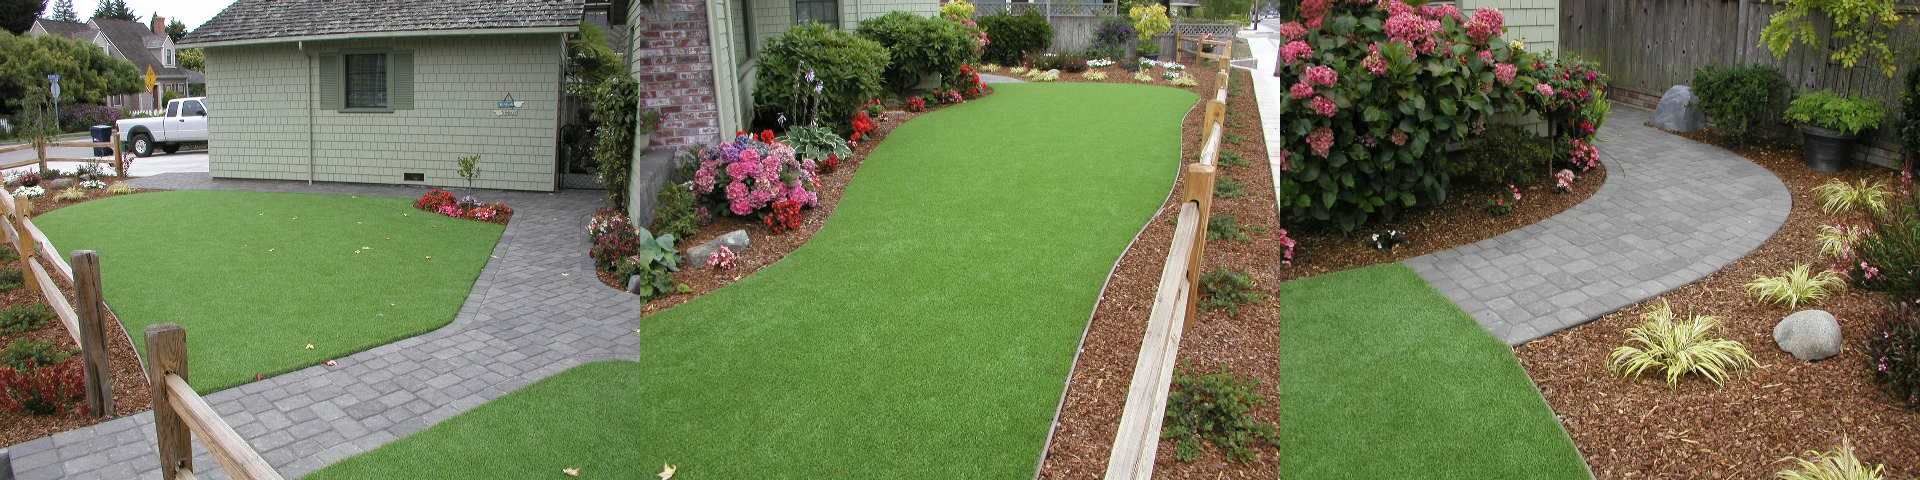 Pavers and Artificial Turf in Capitola, CA